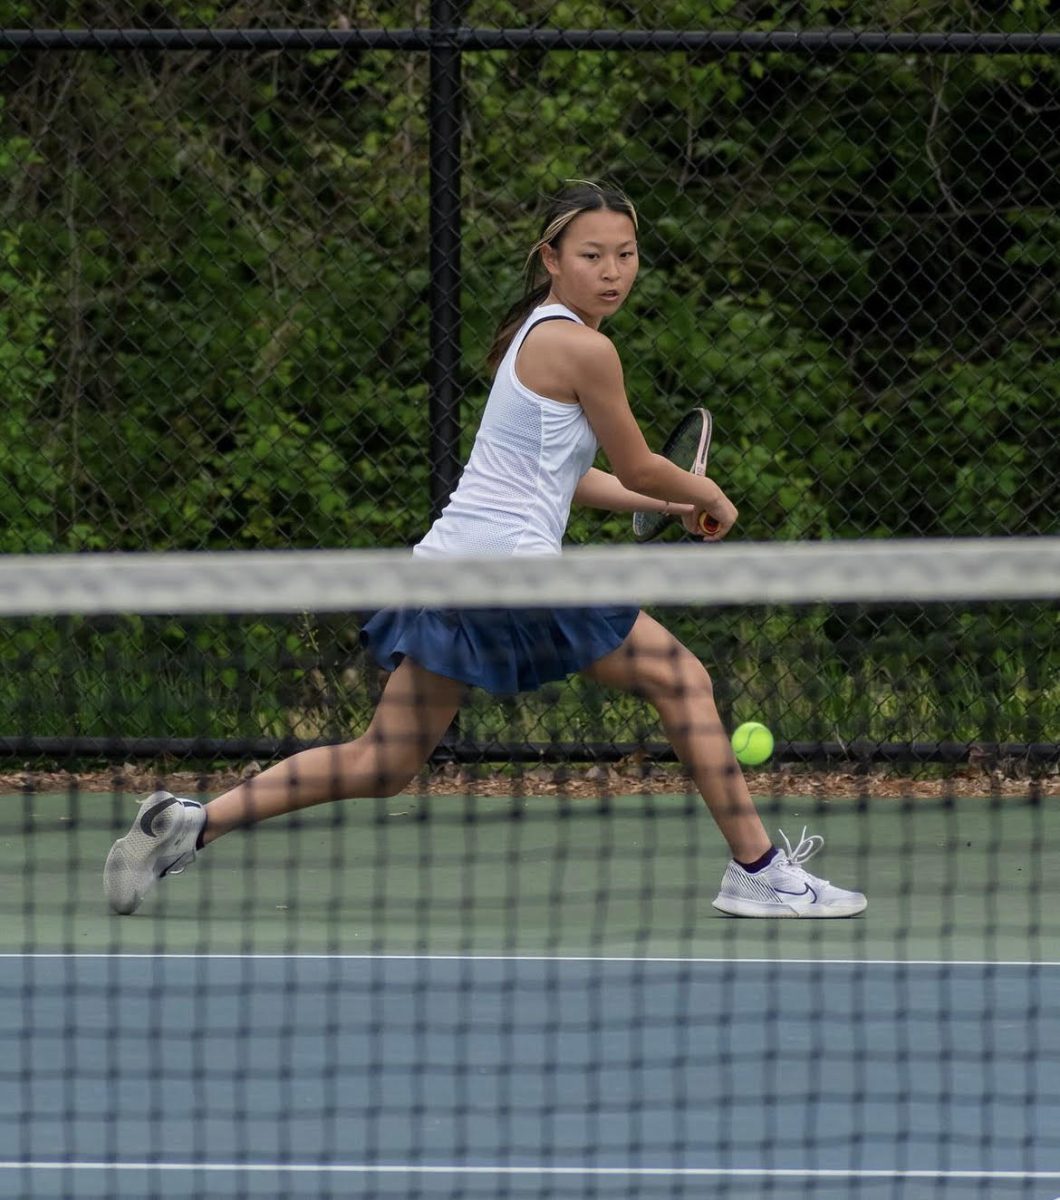 Sophomore+Katherine+Yao+hits+a+hard+backhand+shot+against+her+opponent+during+a+match+vs+Richard+Montgomery++on+Apr.+18.